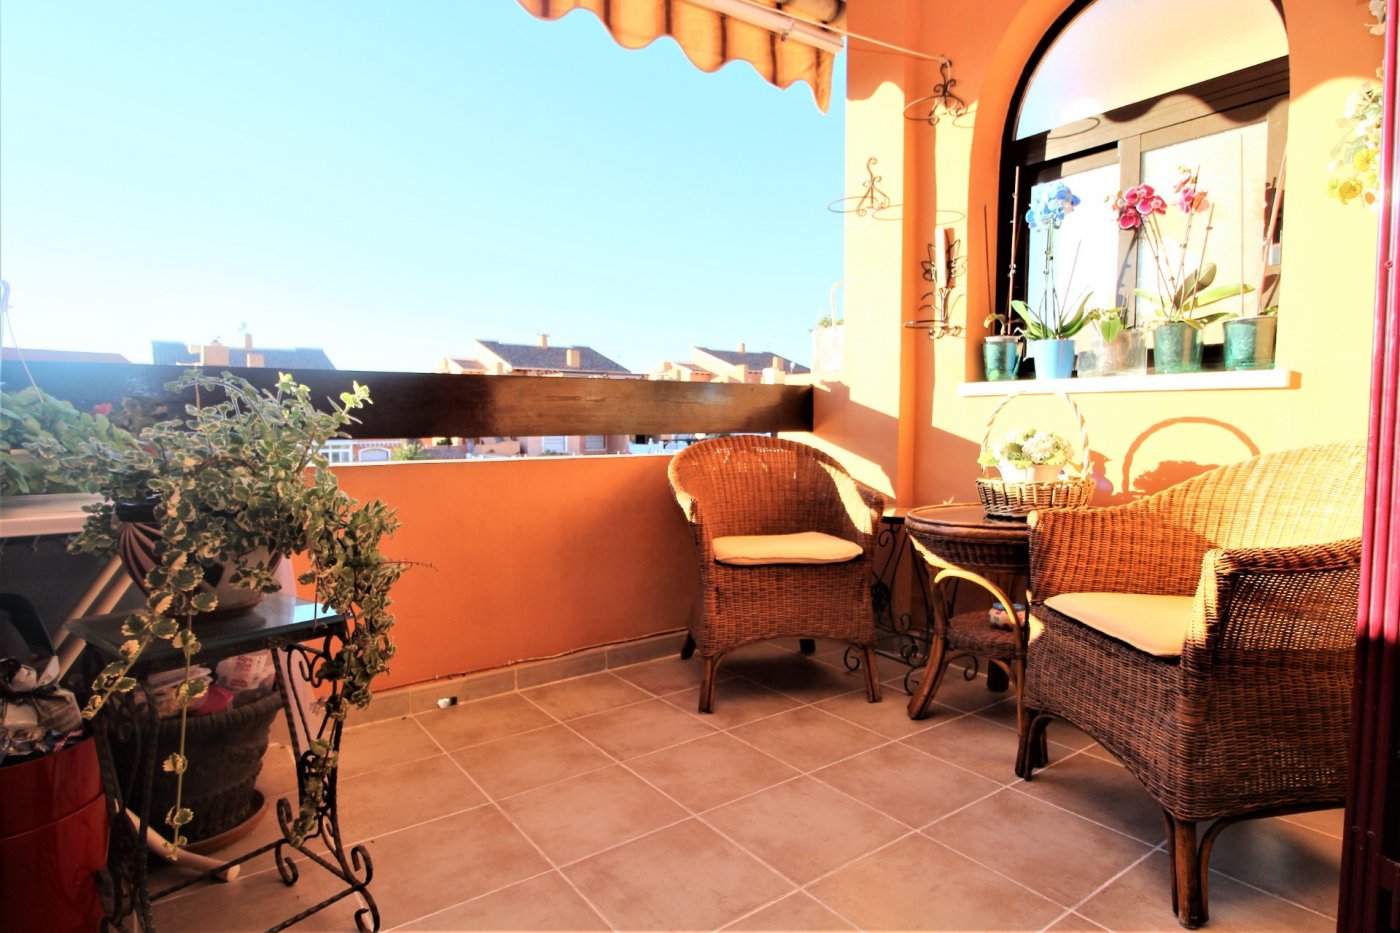 Charming holiday apartment for sale with a terrace in a gated complex in Torrevieja.